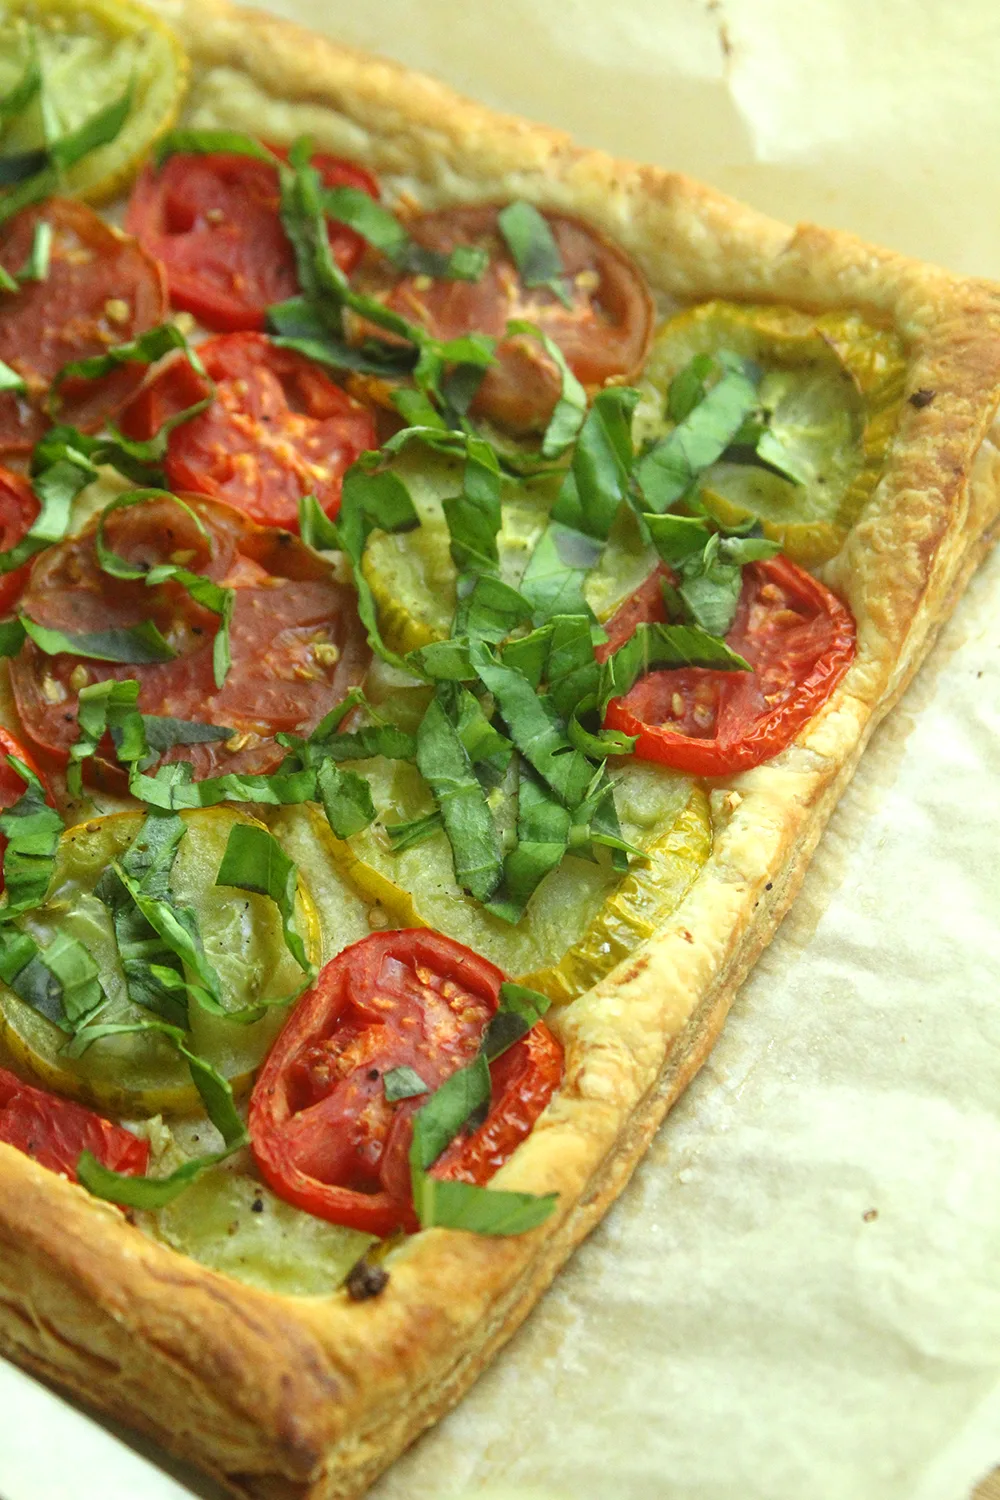 Fresh tomatoes, garlic, olive oil and wisps of basil make this flaky, sweet, bright Tomato Basil Tart brilliant. And it's easy to make!